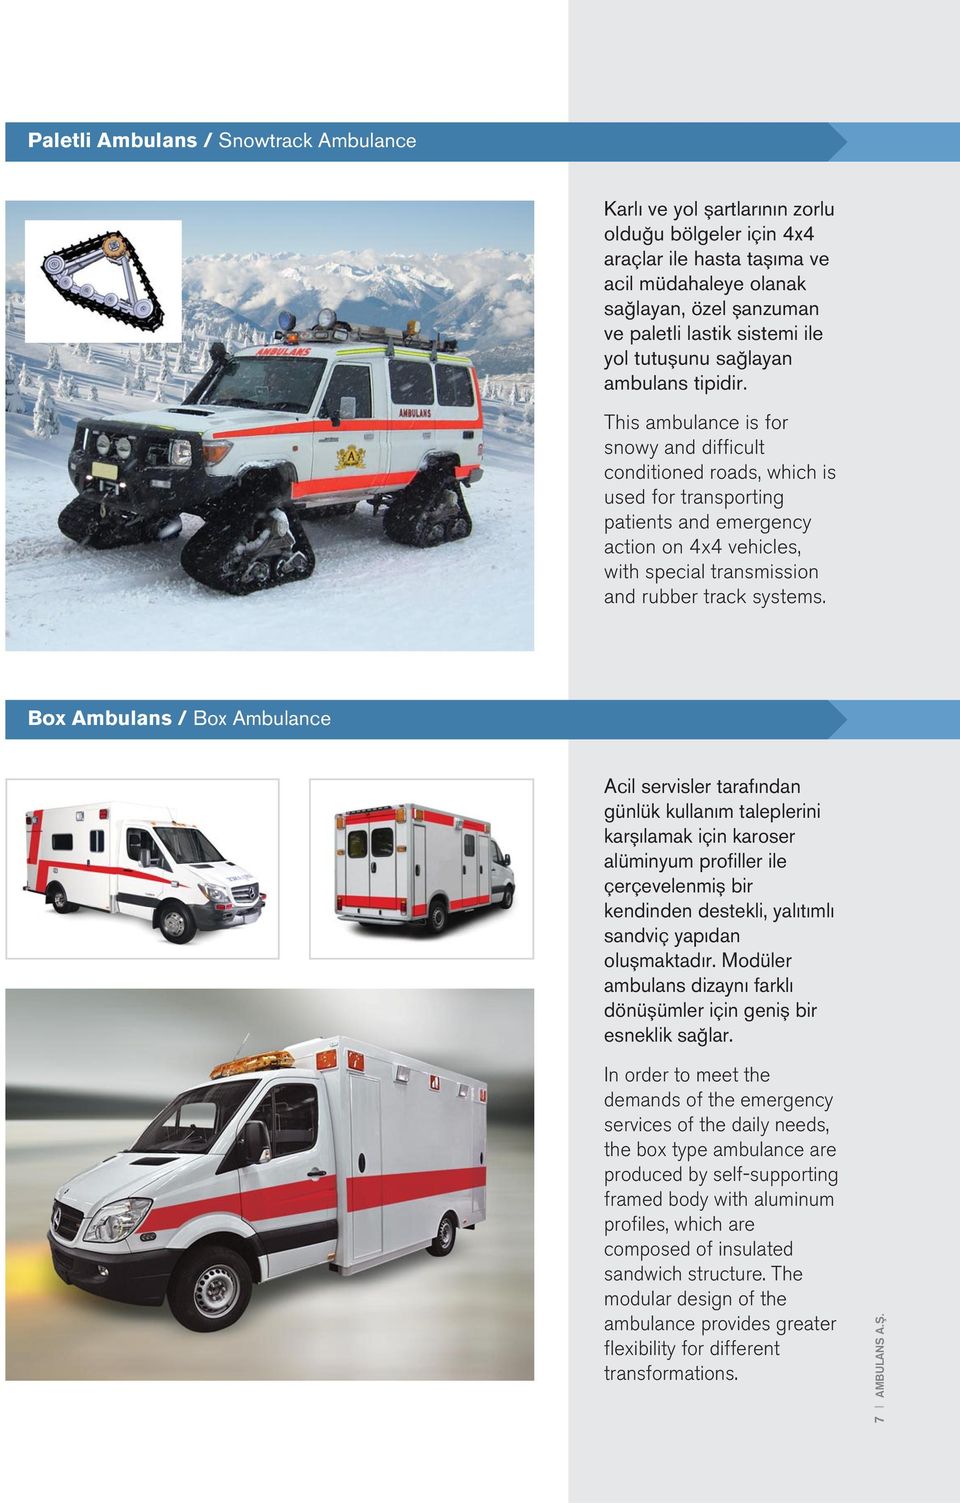 This ambulance is for snowy and difficult conditioned roads, which is used for transporting patients and emergency action on 4x4 vehicles, with special transmission and rubber track systems.